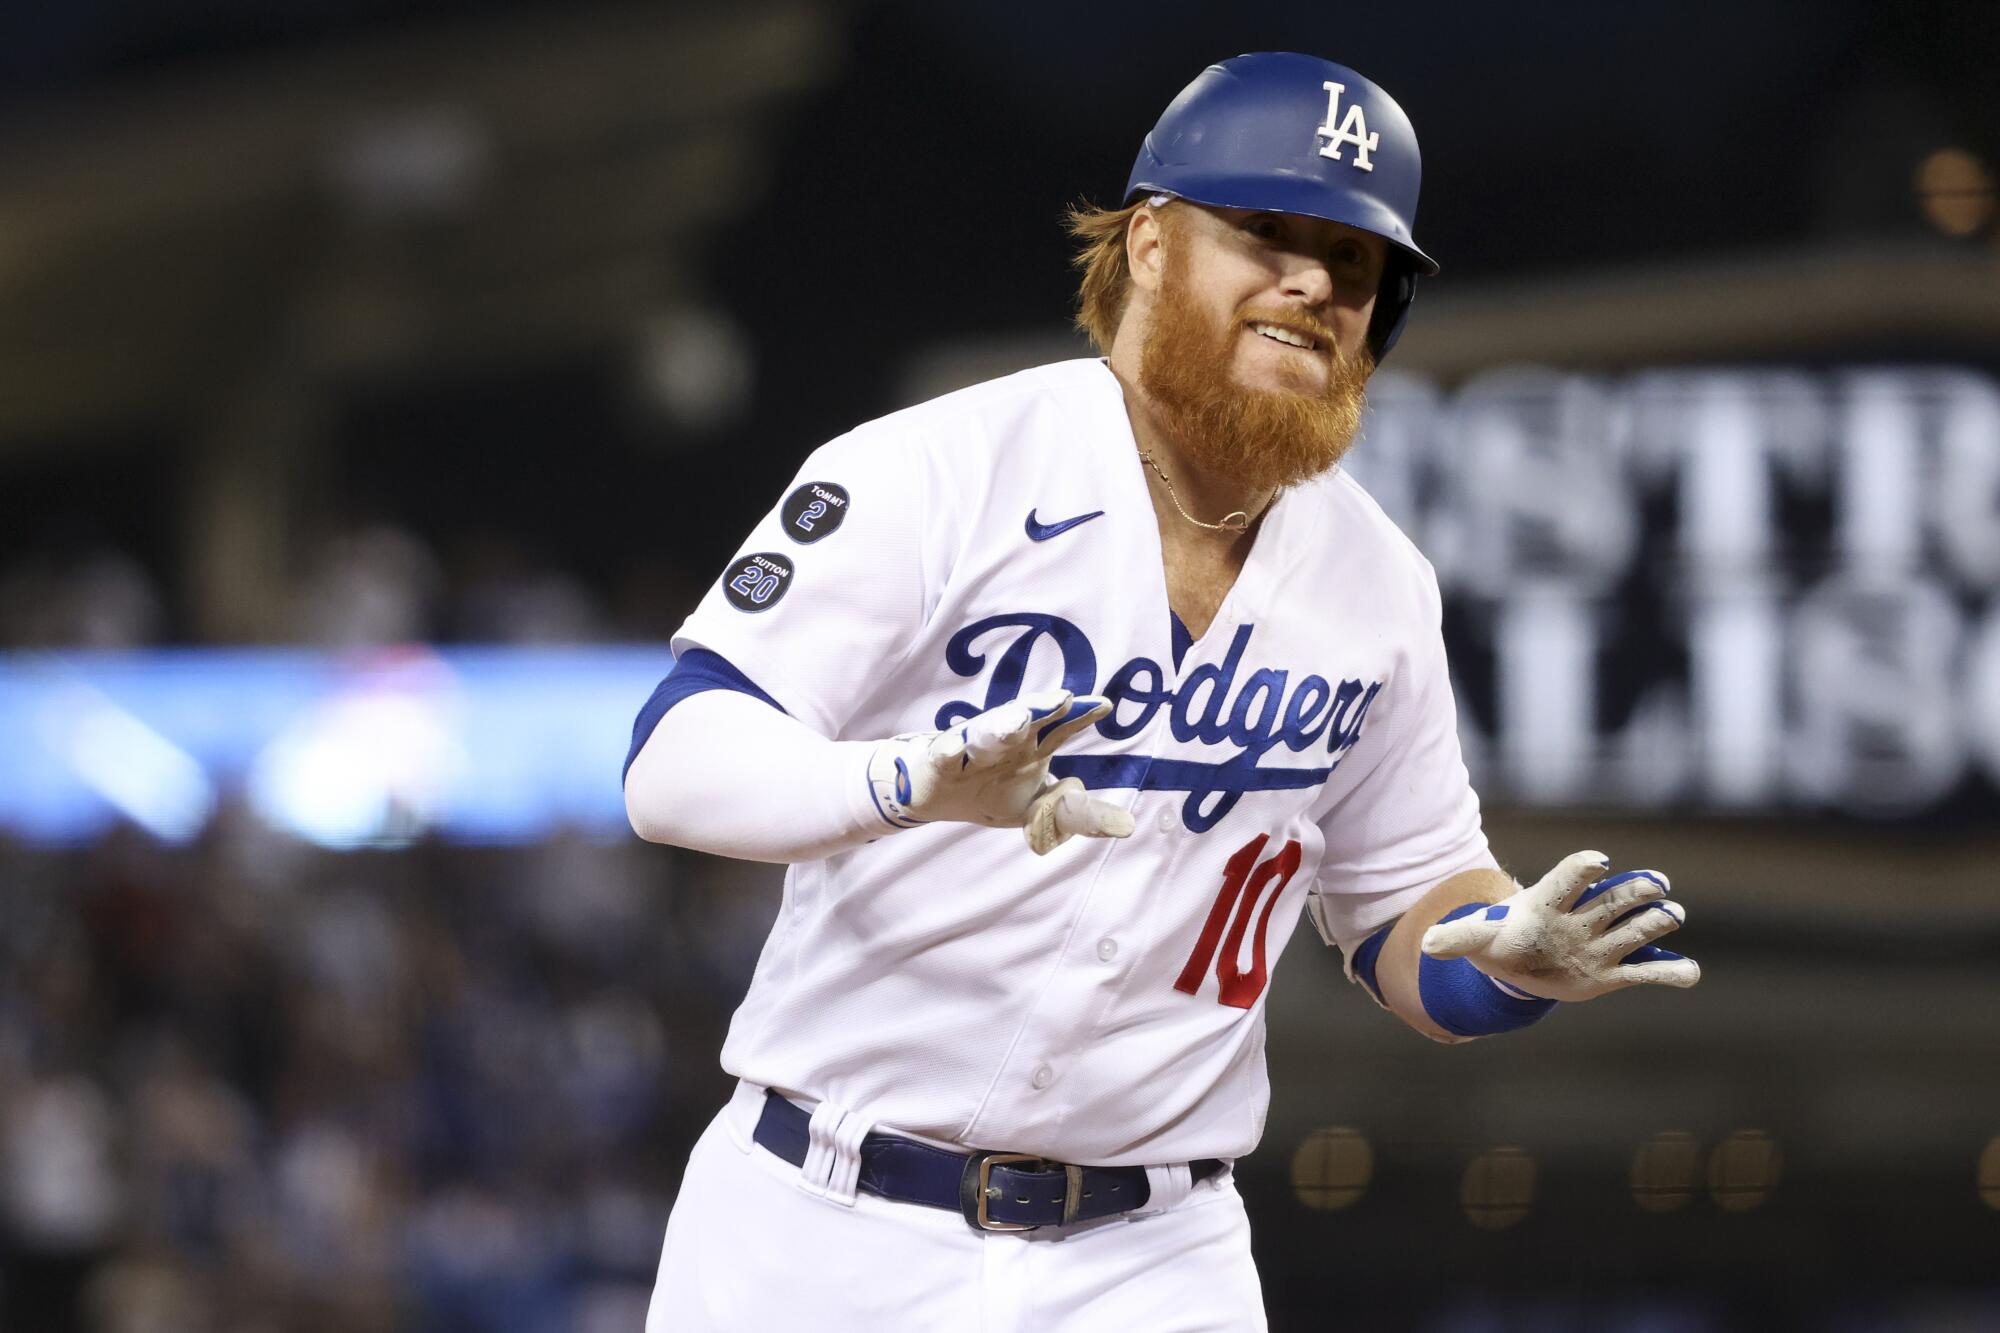 Los Angeles Dodgers' Justin Turner rounds the bases after hitting a solo home run to tie the game